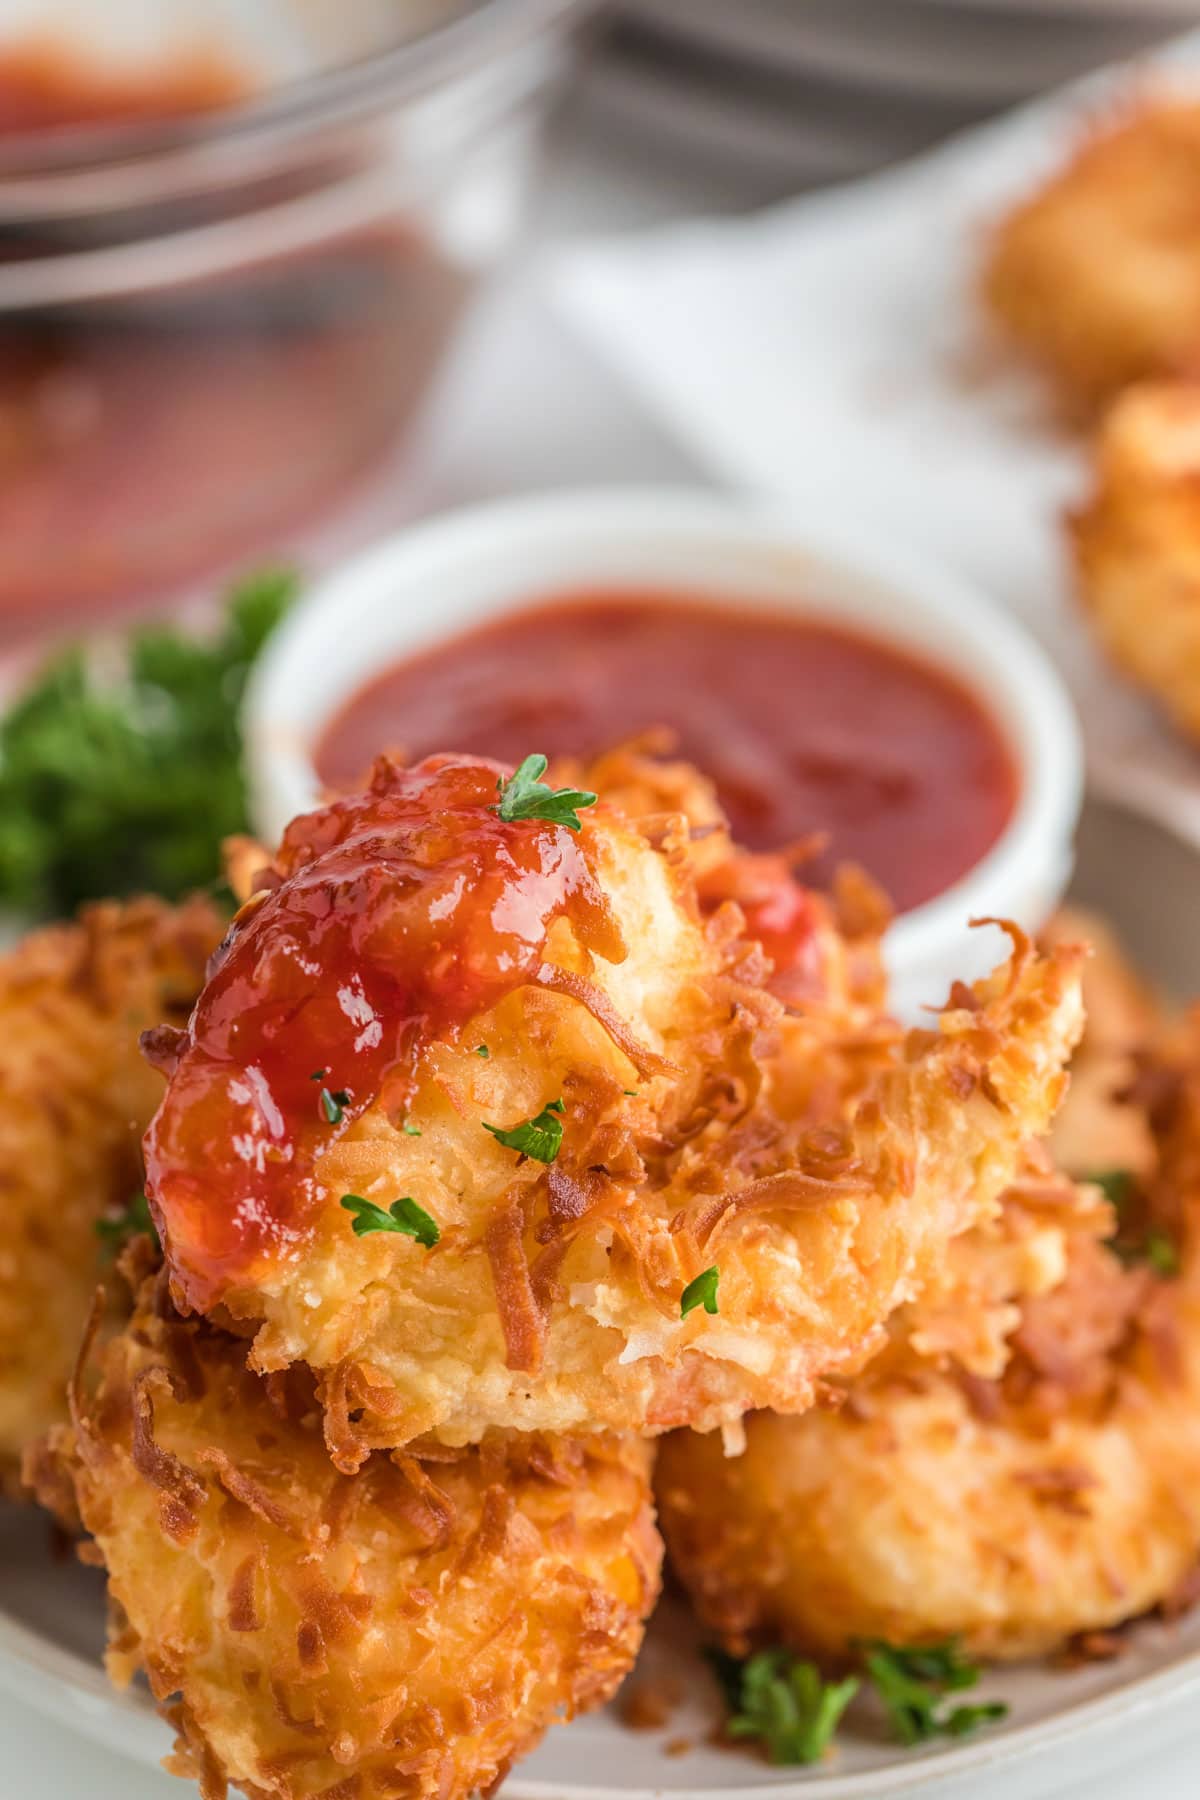 coconut shrimp on a platter with a dish of a red sauce.